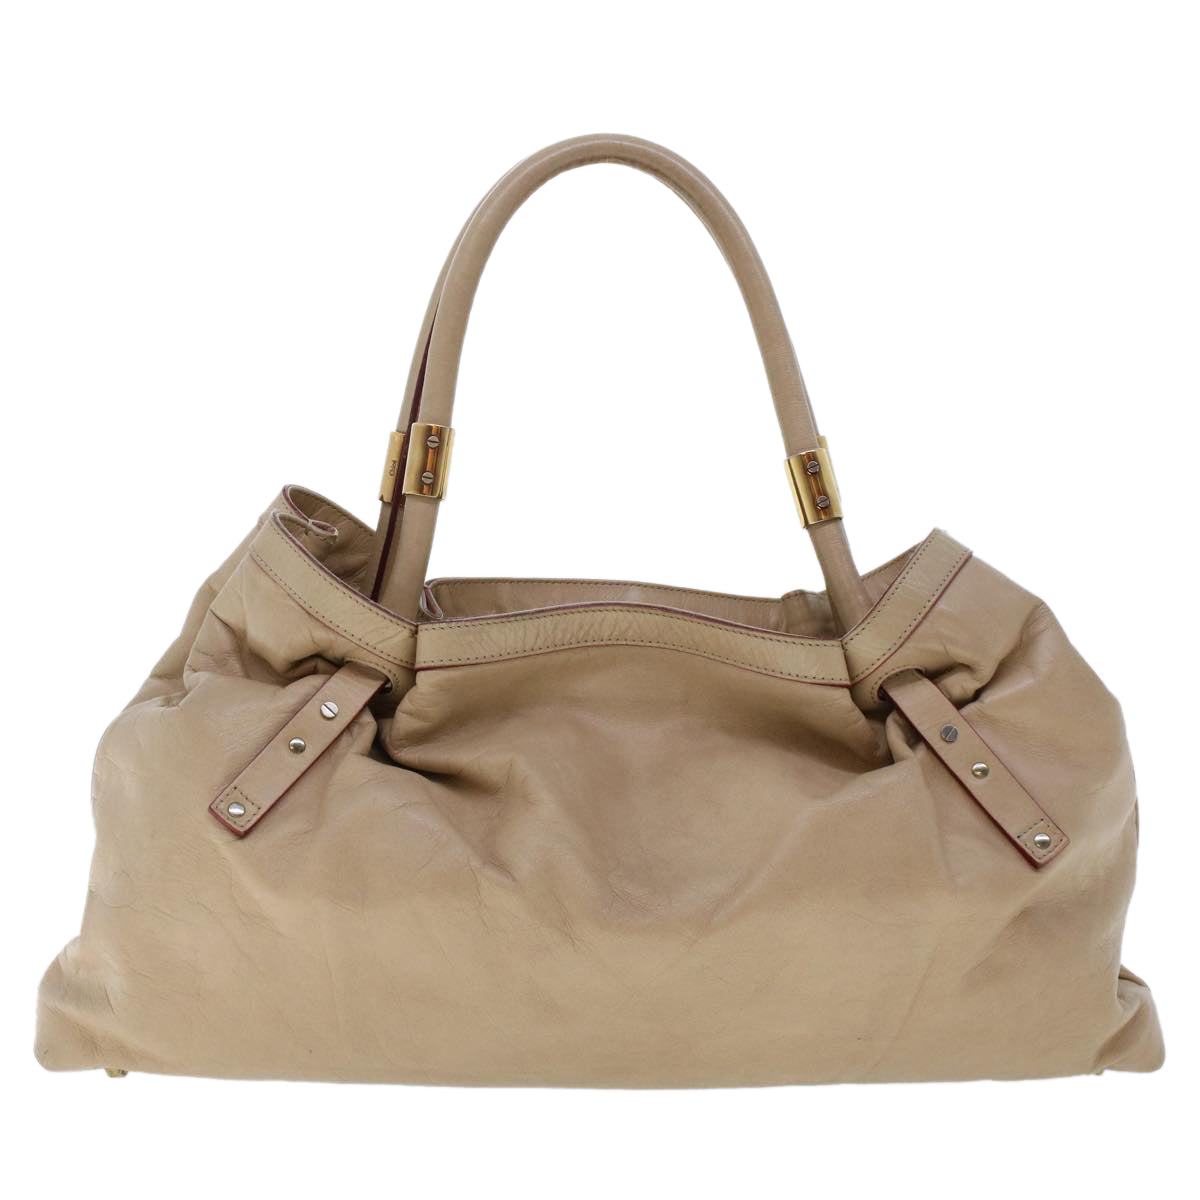 Chloe Victoria Hand Bag Leather Beige Auth bs6433 - 0